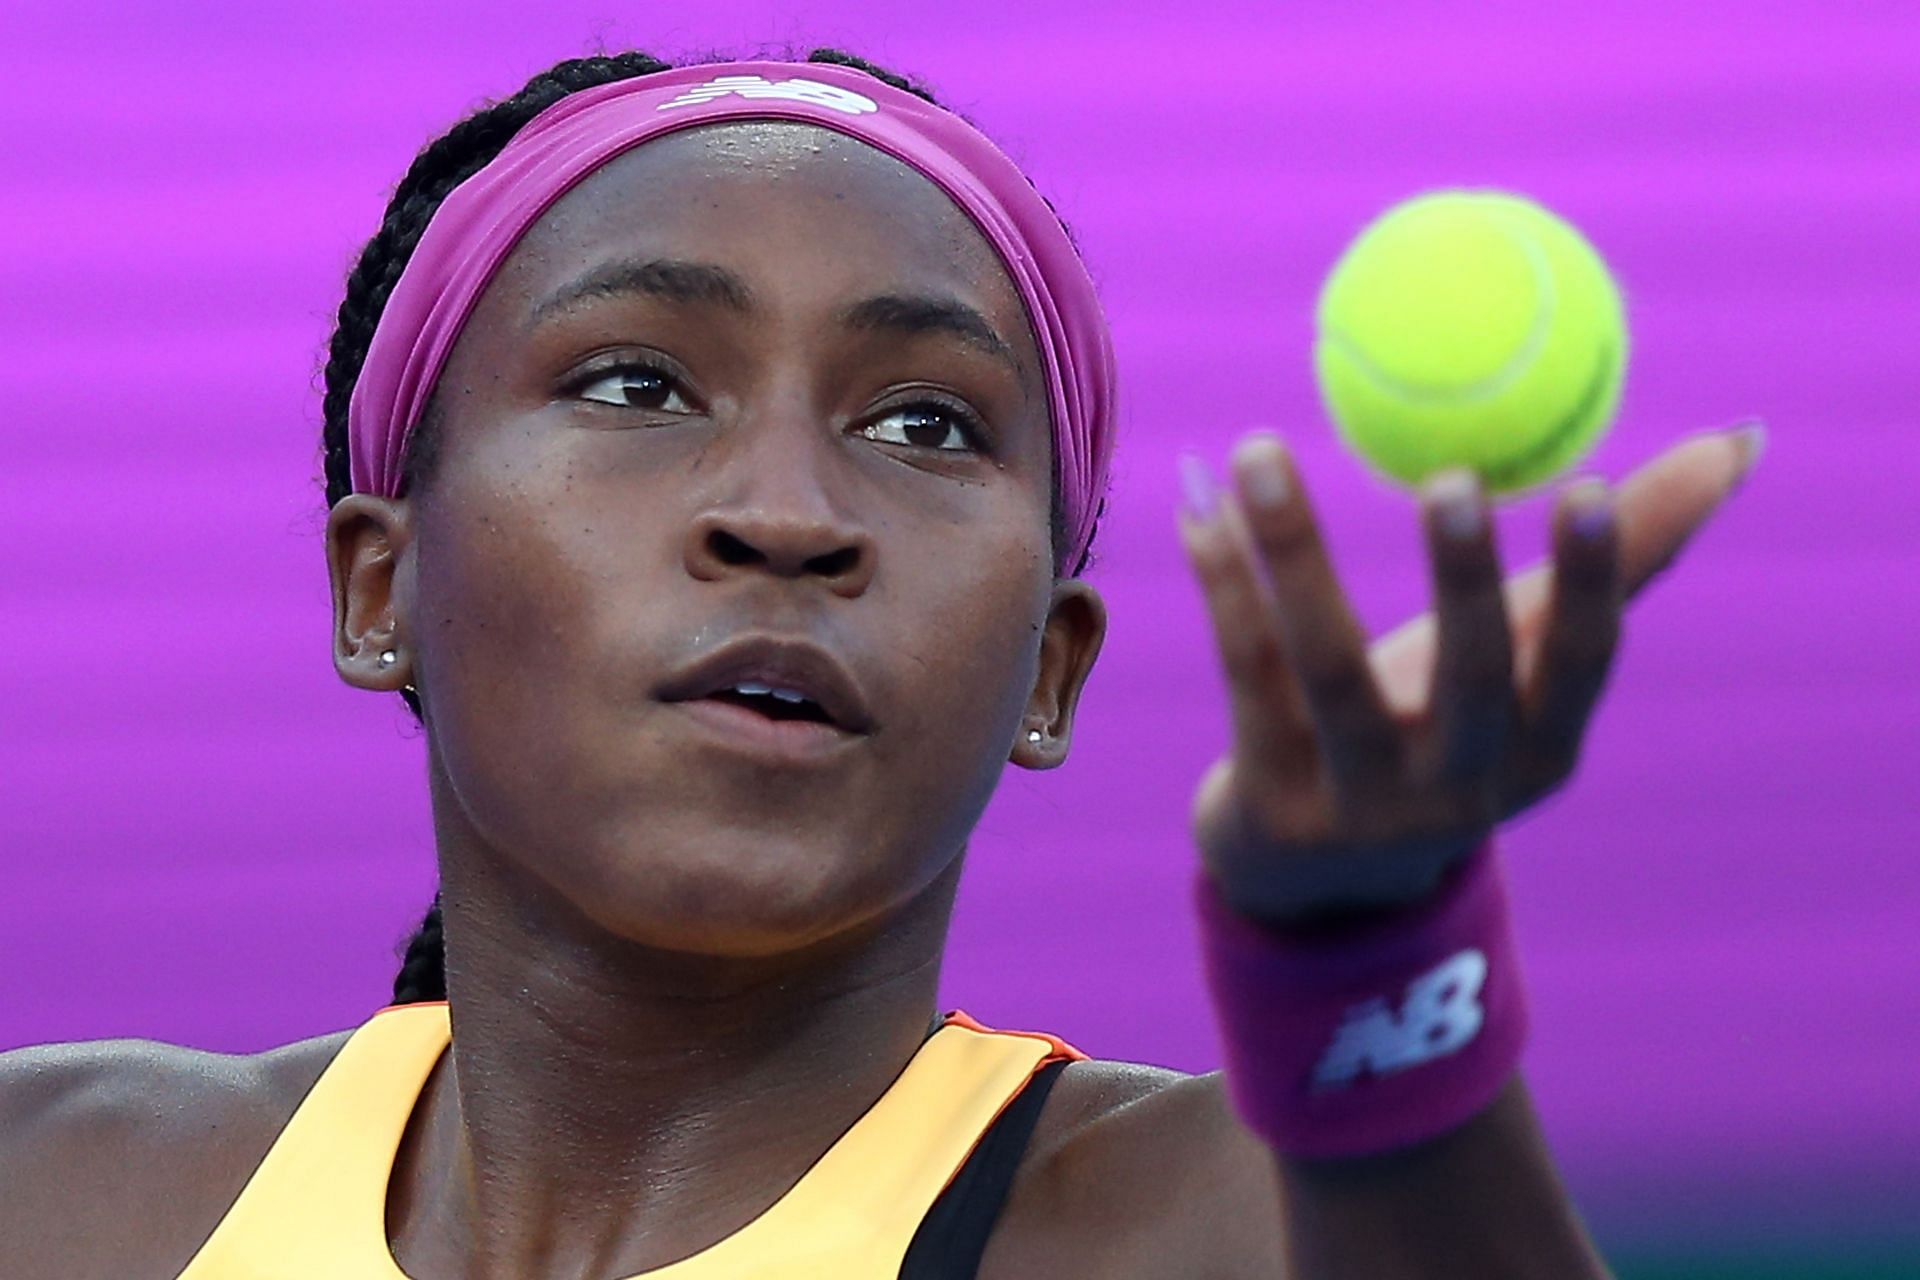 Coco Gauff is the youngest player in the top 100 of the WTA rankings